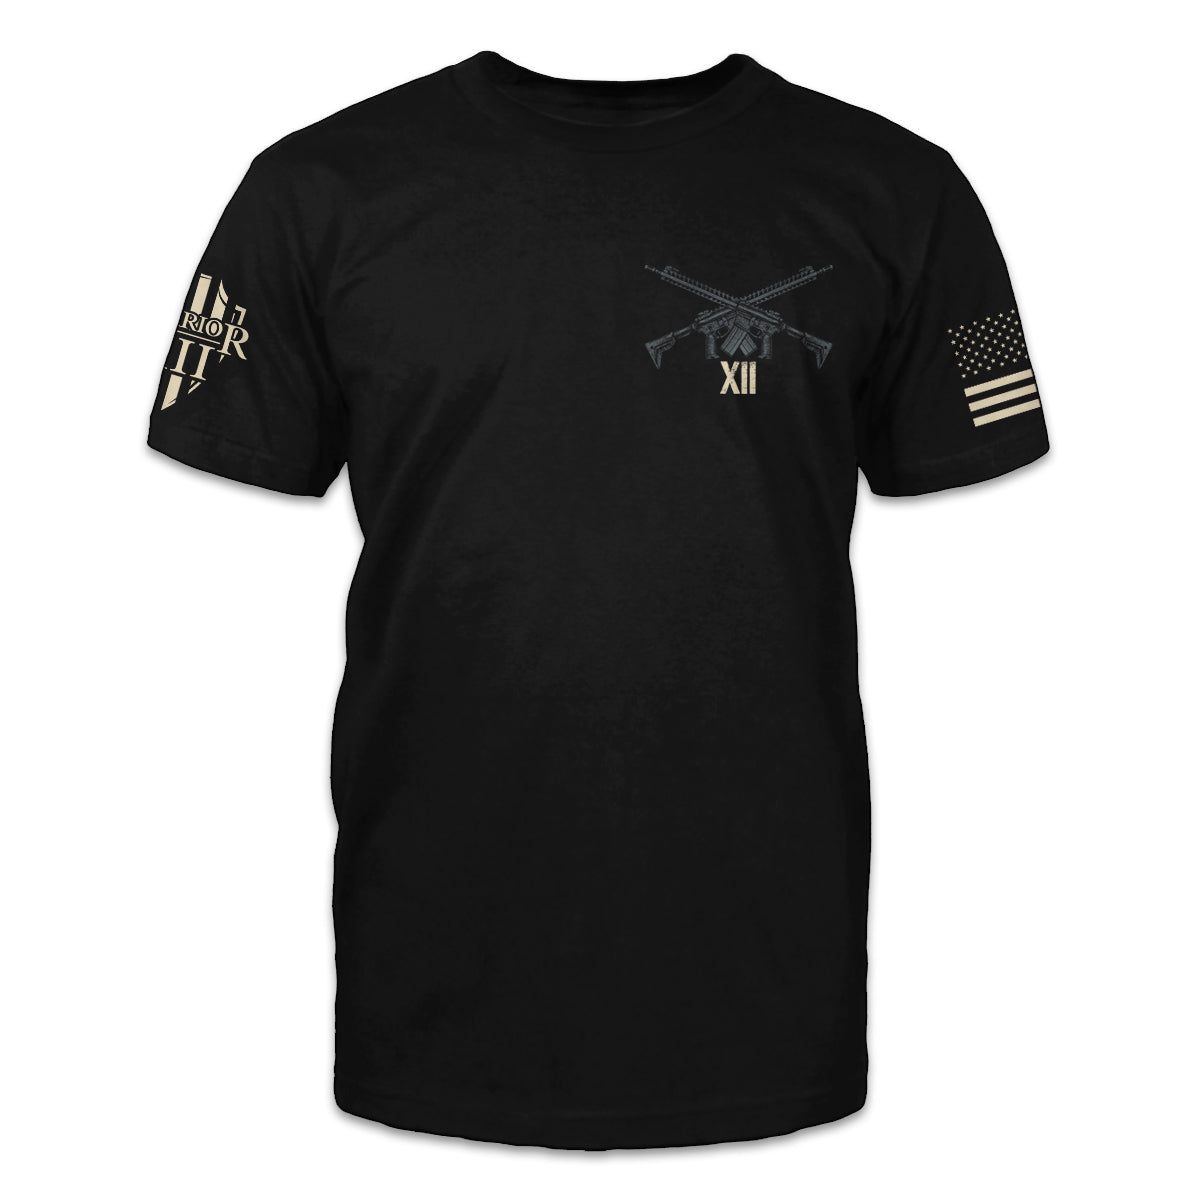 A black t-shirt with two AR15's crossed over printed on the front of the shirt.